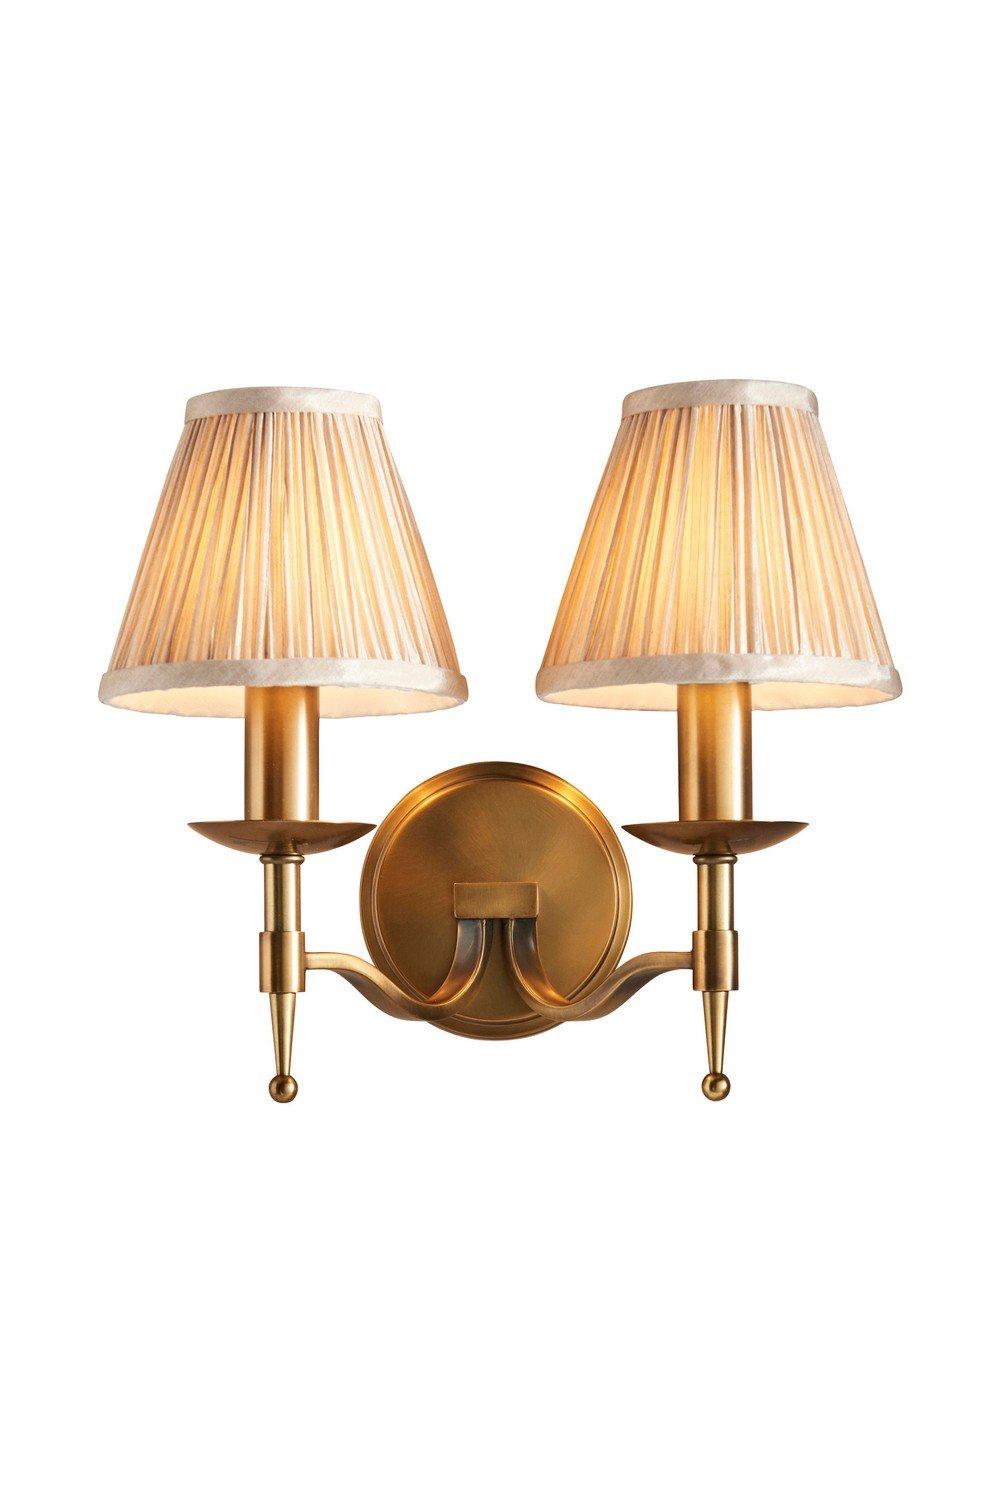 Stanford 2 Light Indoor Twin Candle Wall Light Antique Brass with Beige Shades E14